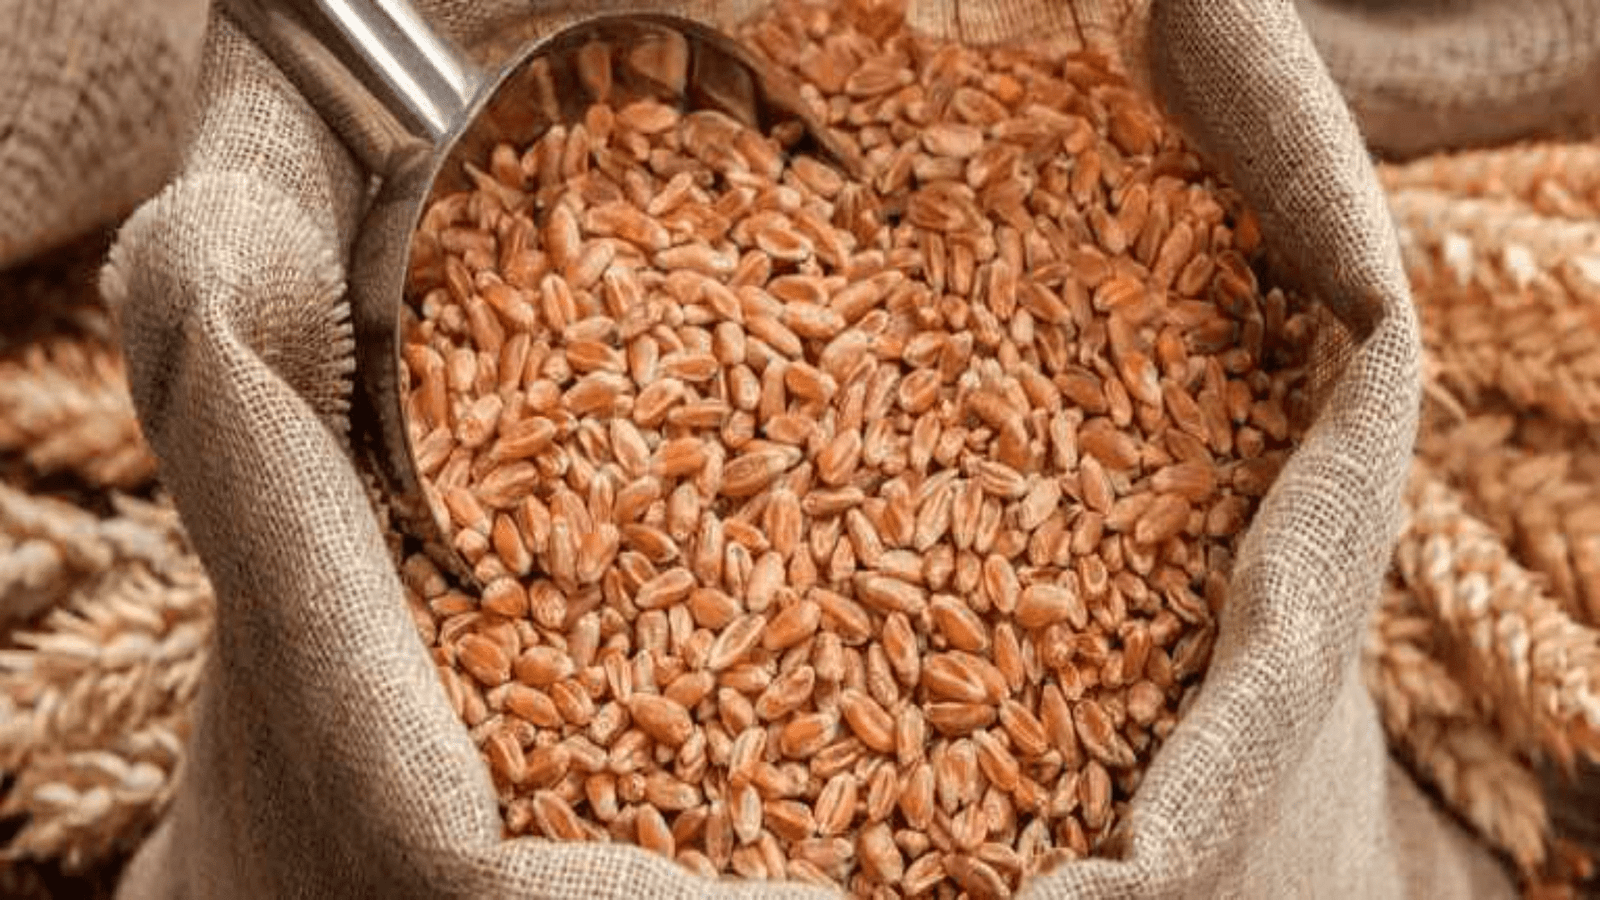 Pakistan imports $1 bn of wheat in first nine months of FY: report